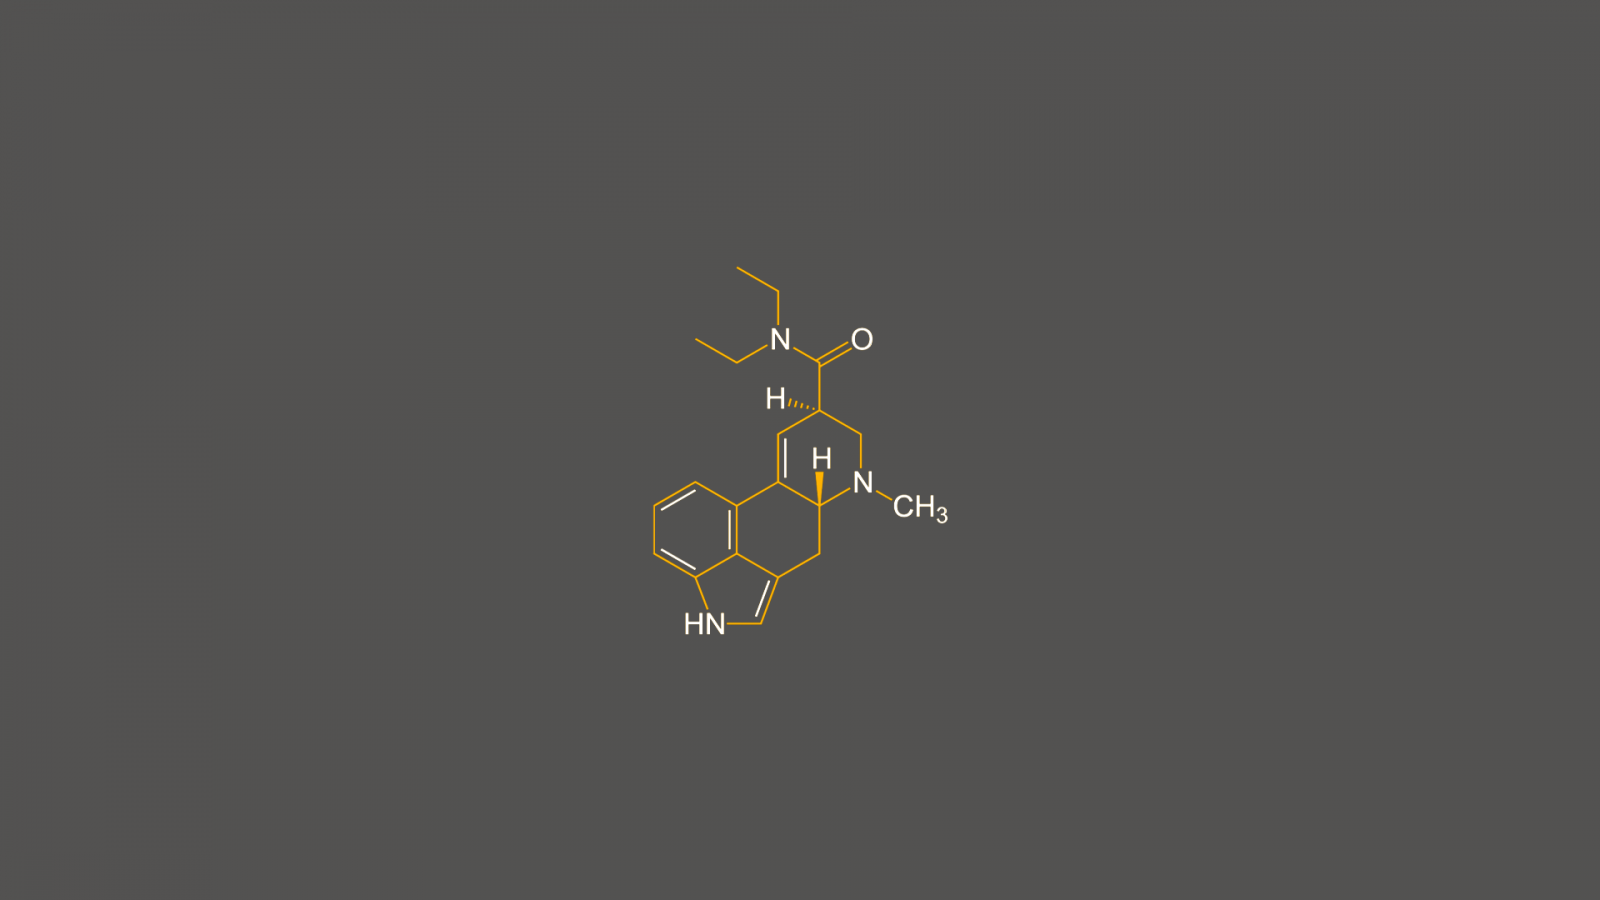 Wallpaper : LSD, minimalism, chemical structures, chemistry 1920x1080